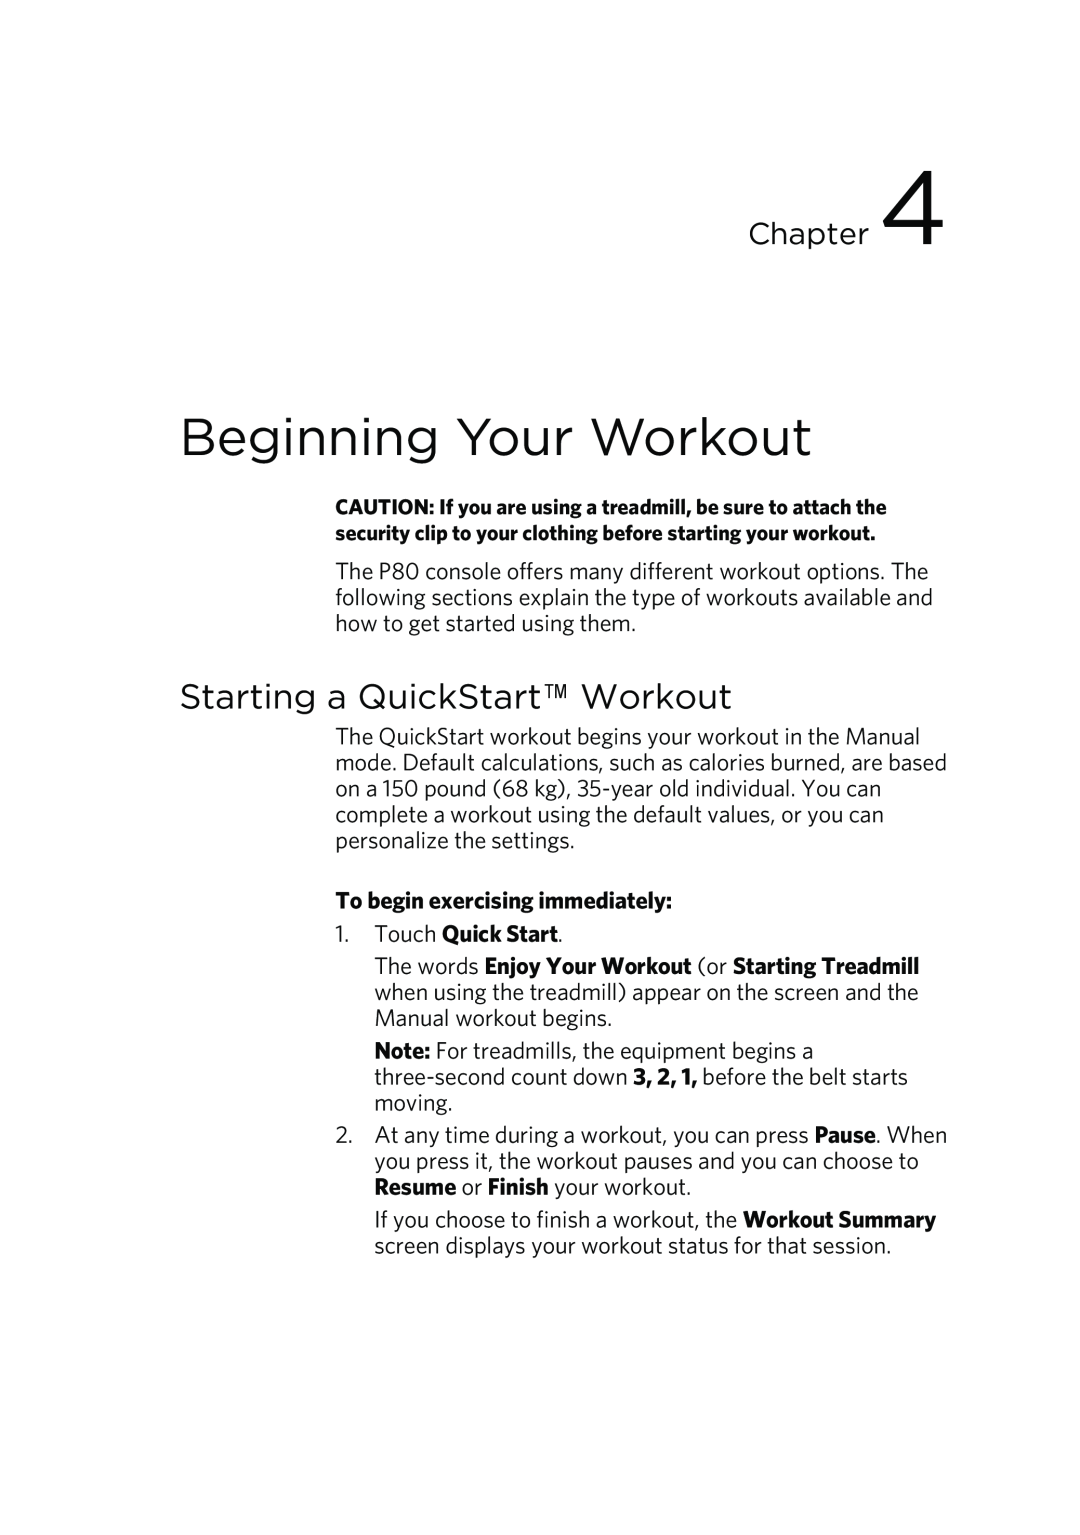 Precor P80 manual Beginning Your Workout, Starting a QuickStart Workout, To begin exercising immediately, Touch Quick Start 